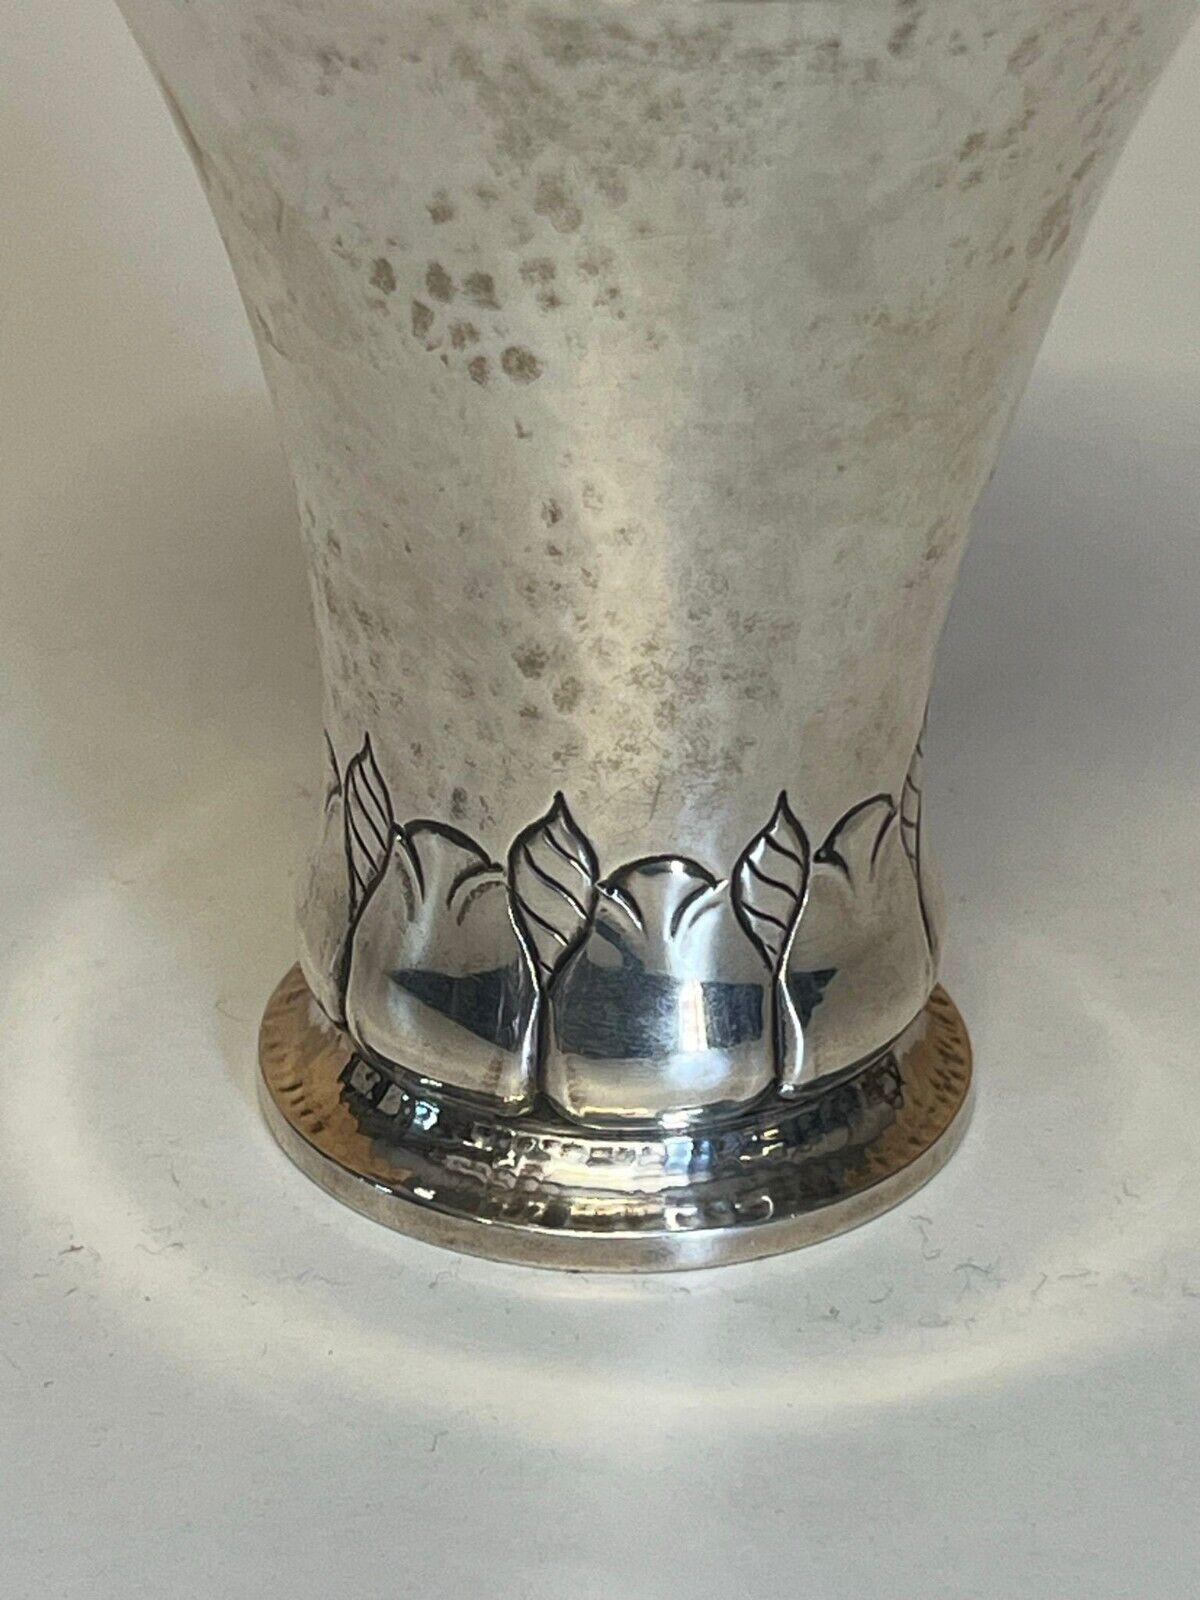 1913-1927 DATED HAND HAMMERED STERLING SiLVER ART NOUVEAU LIBERTY'S STYLE VASE For Sale 4